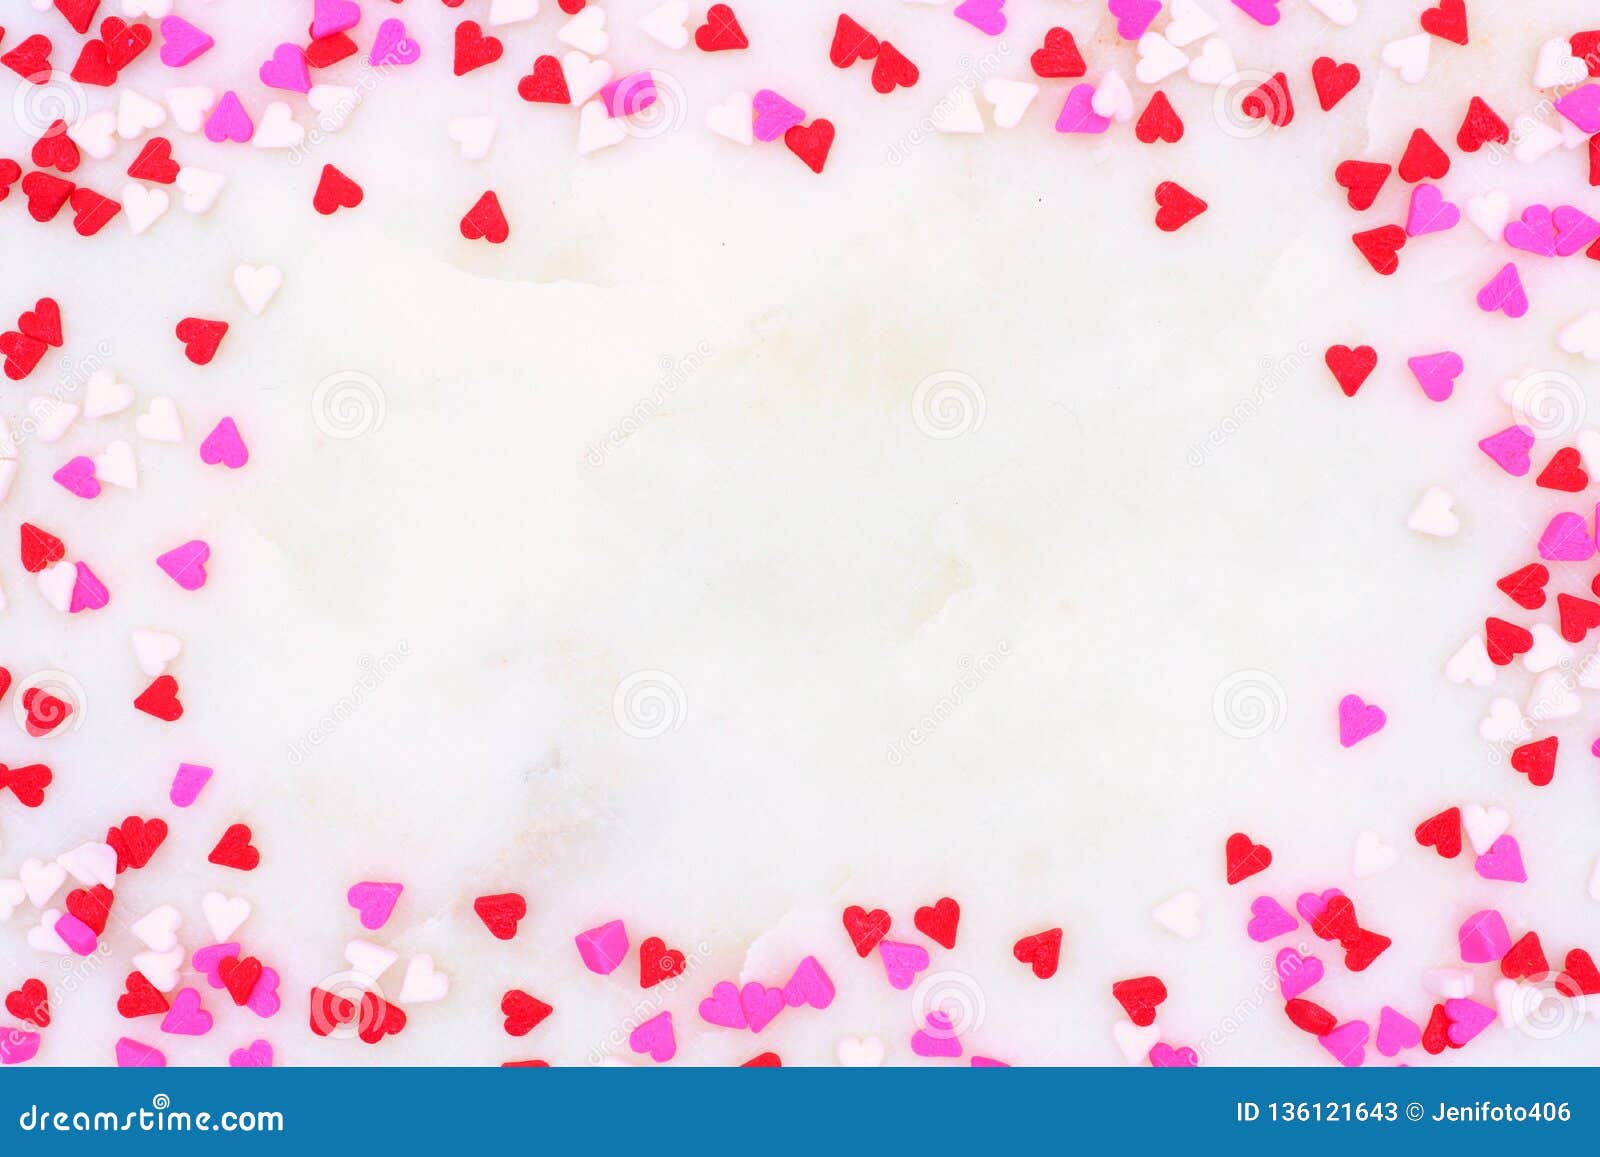 valentines day candy heart sprinkles frame over a white textured background